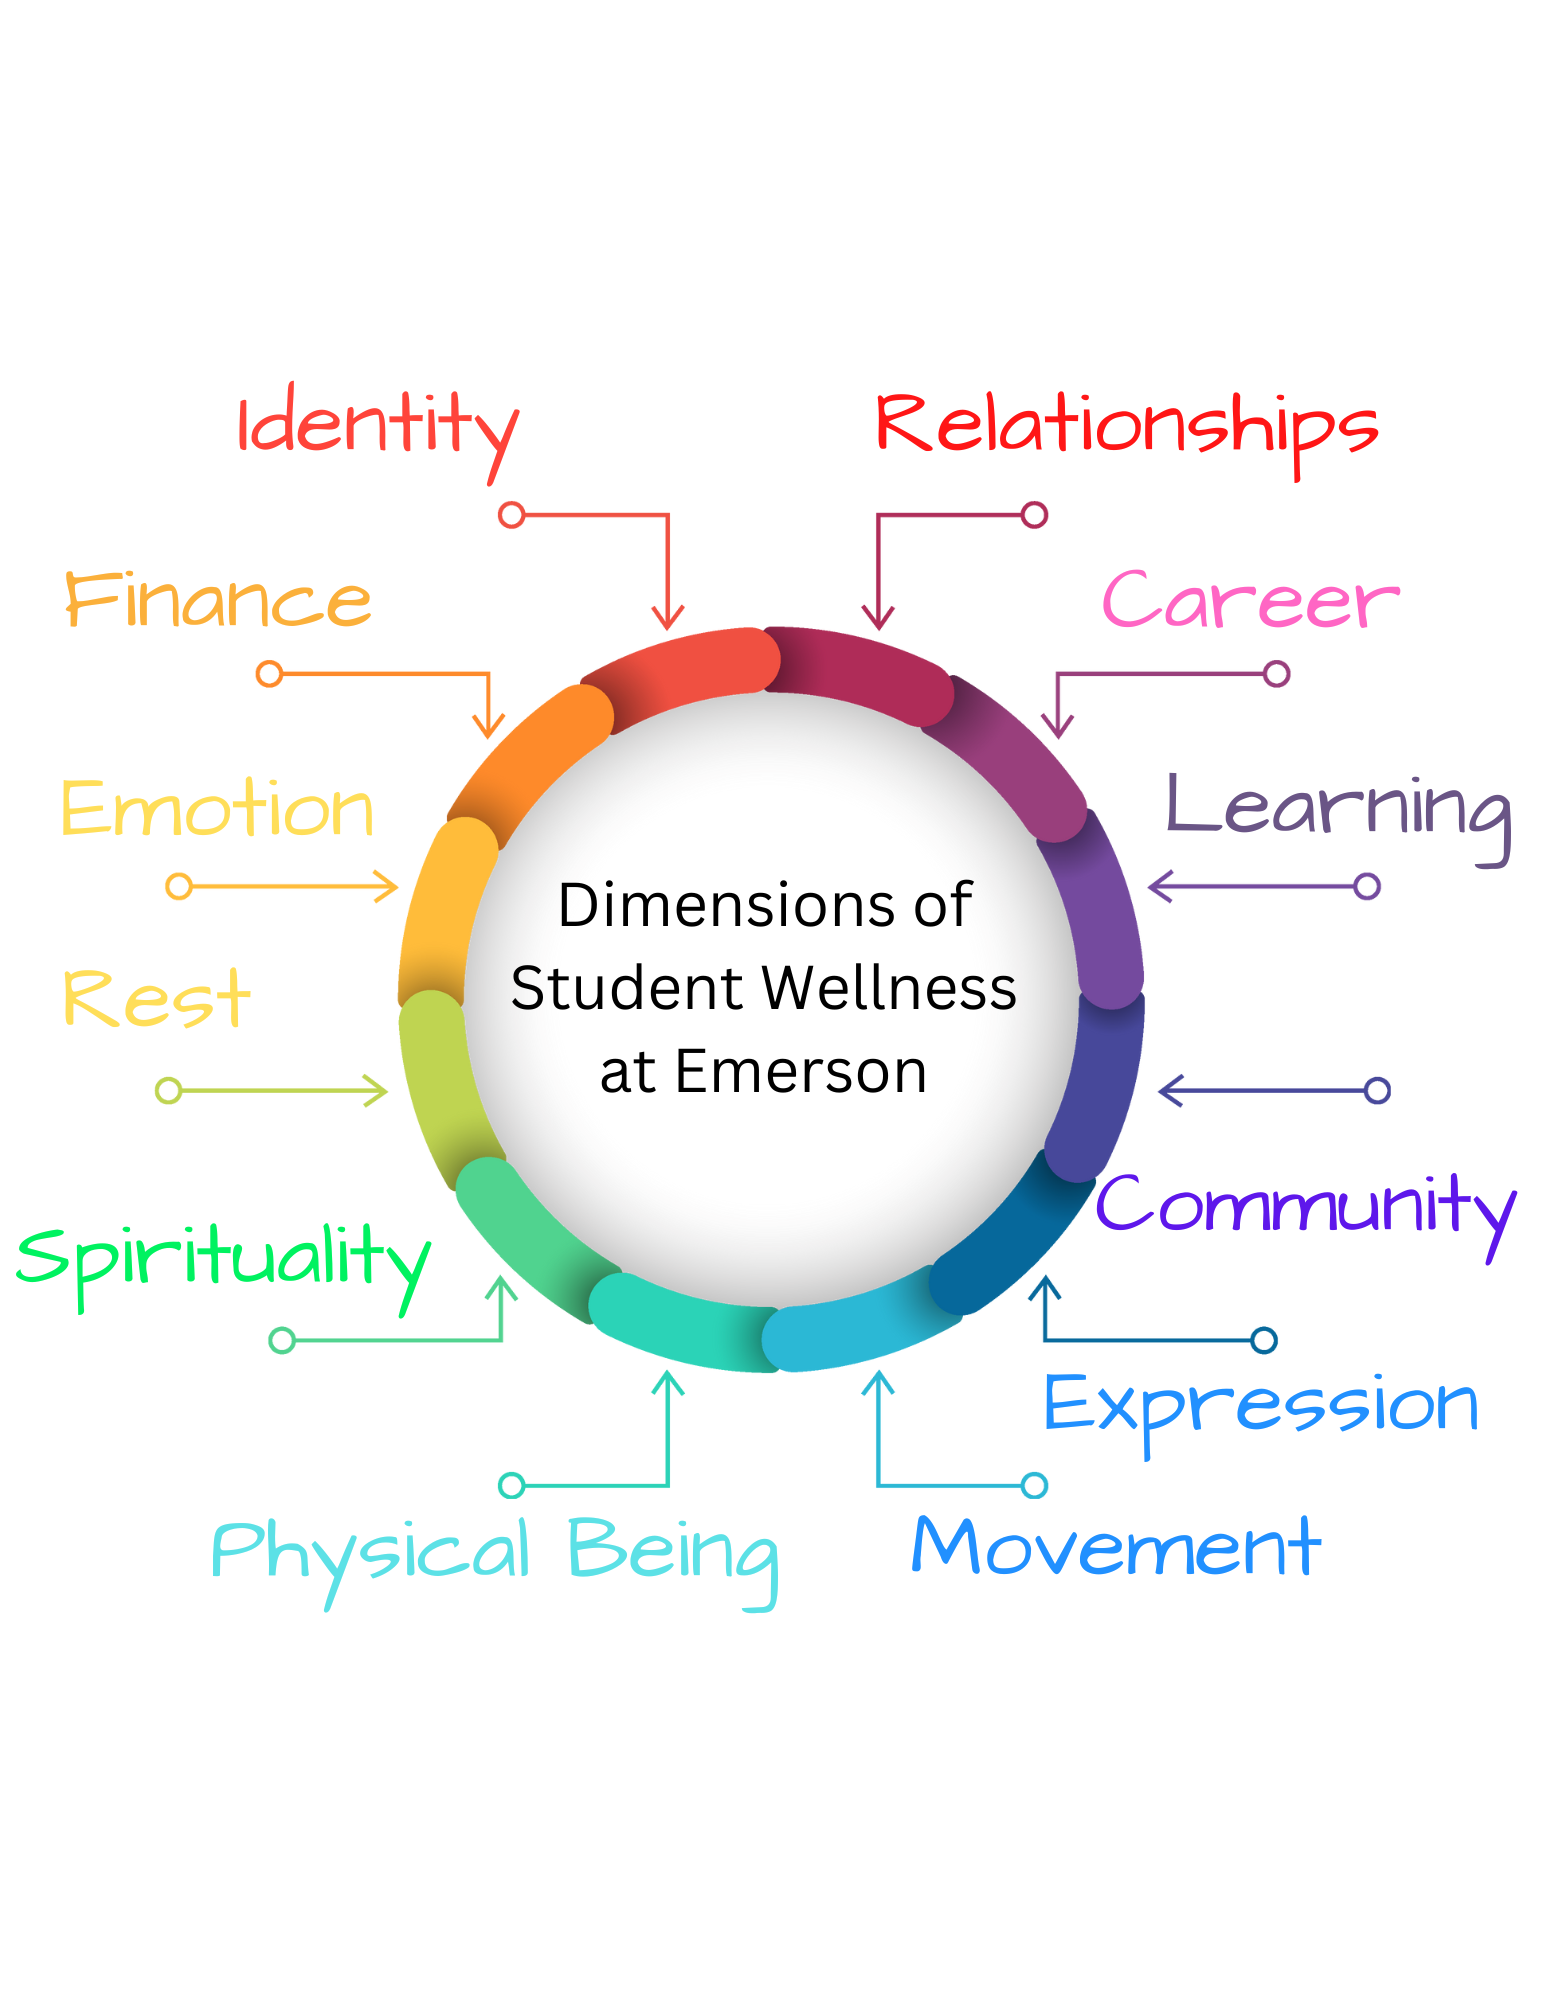 A chart of the Dimensions of Student Wellness at Emerson College